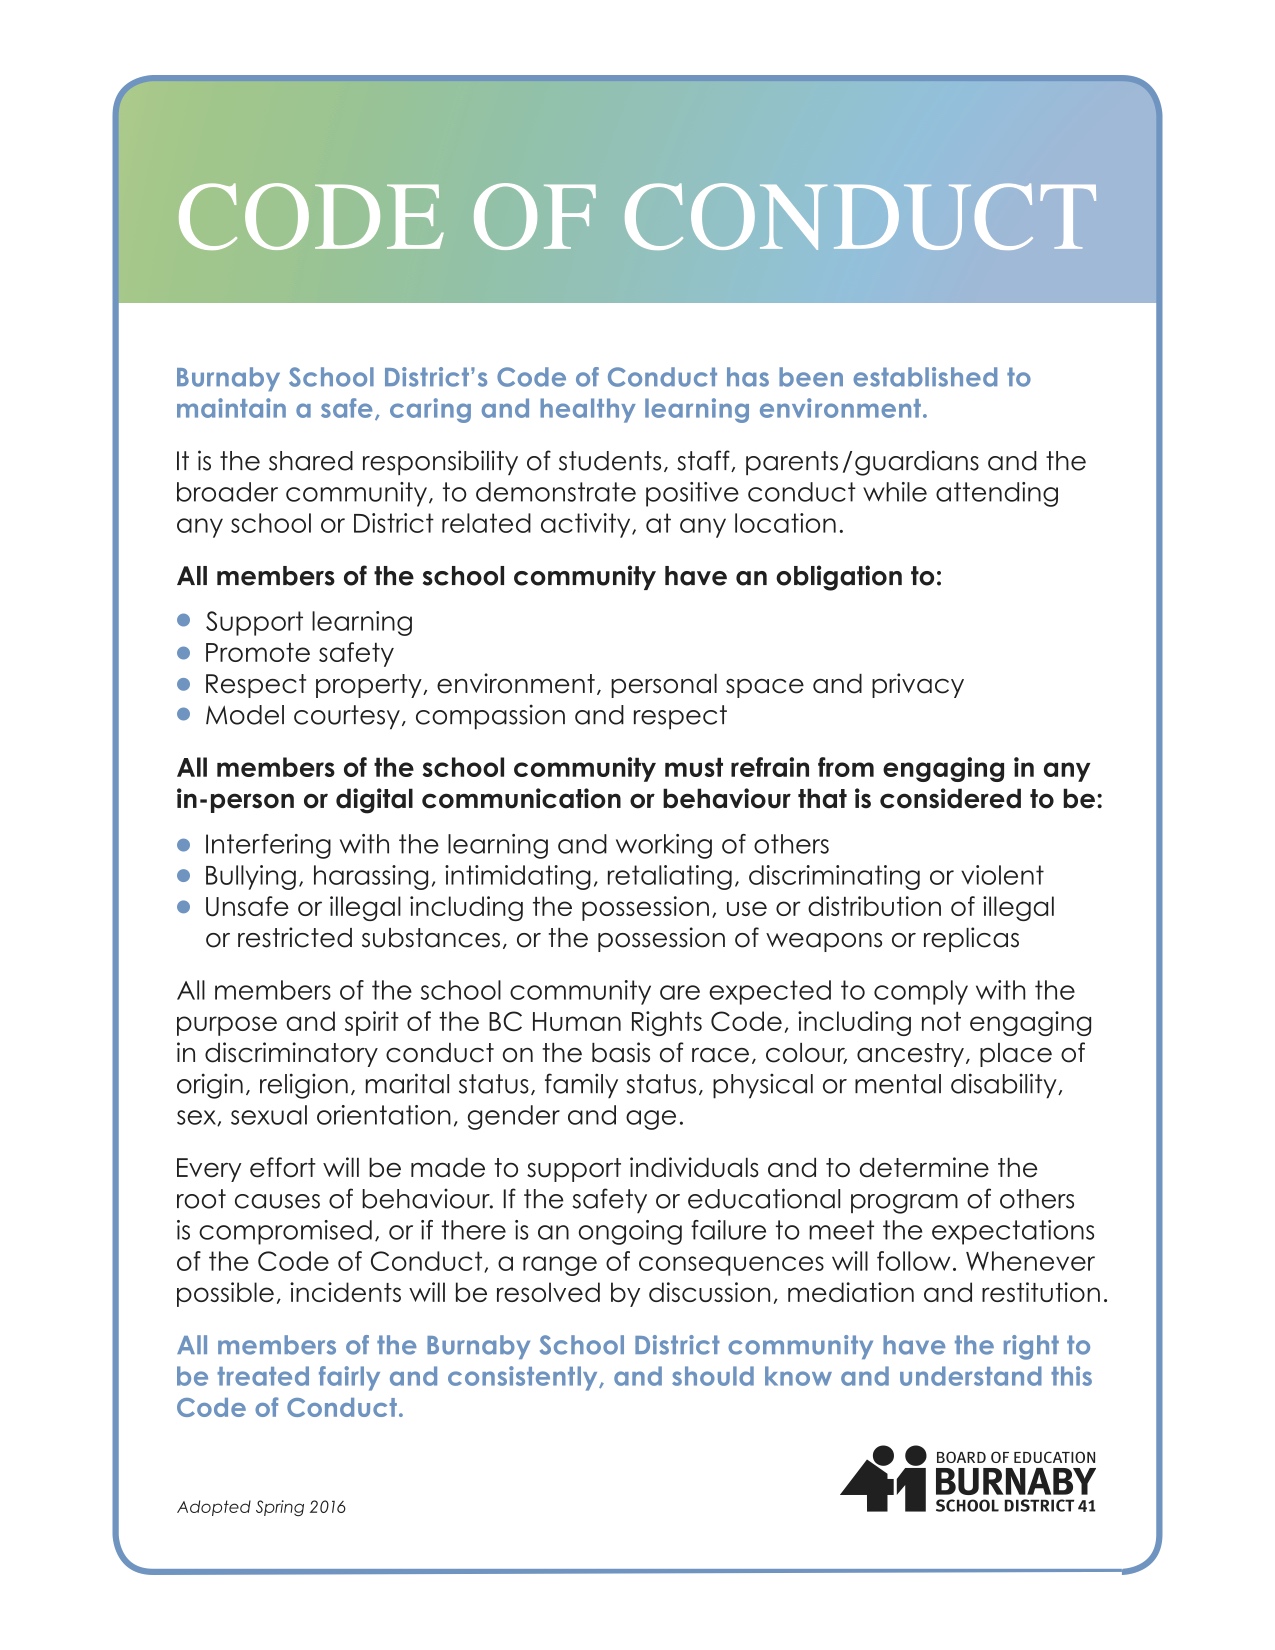 student code of conduct essay